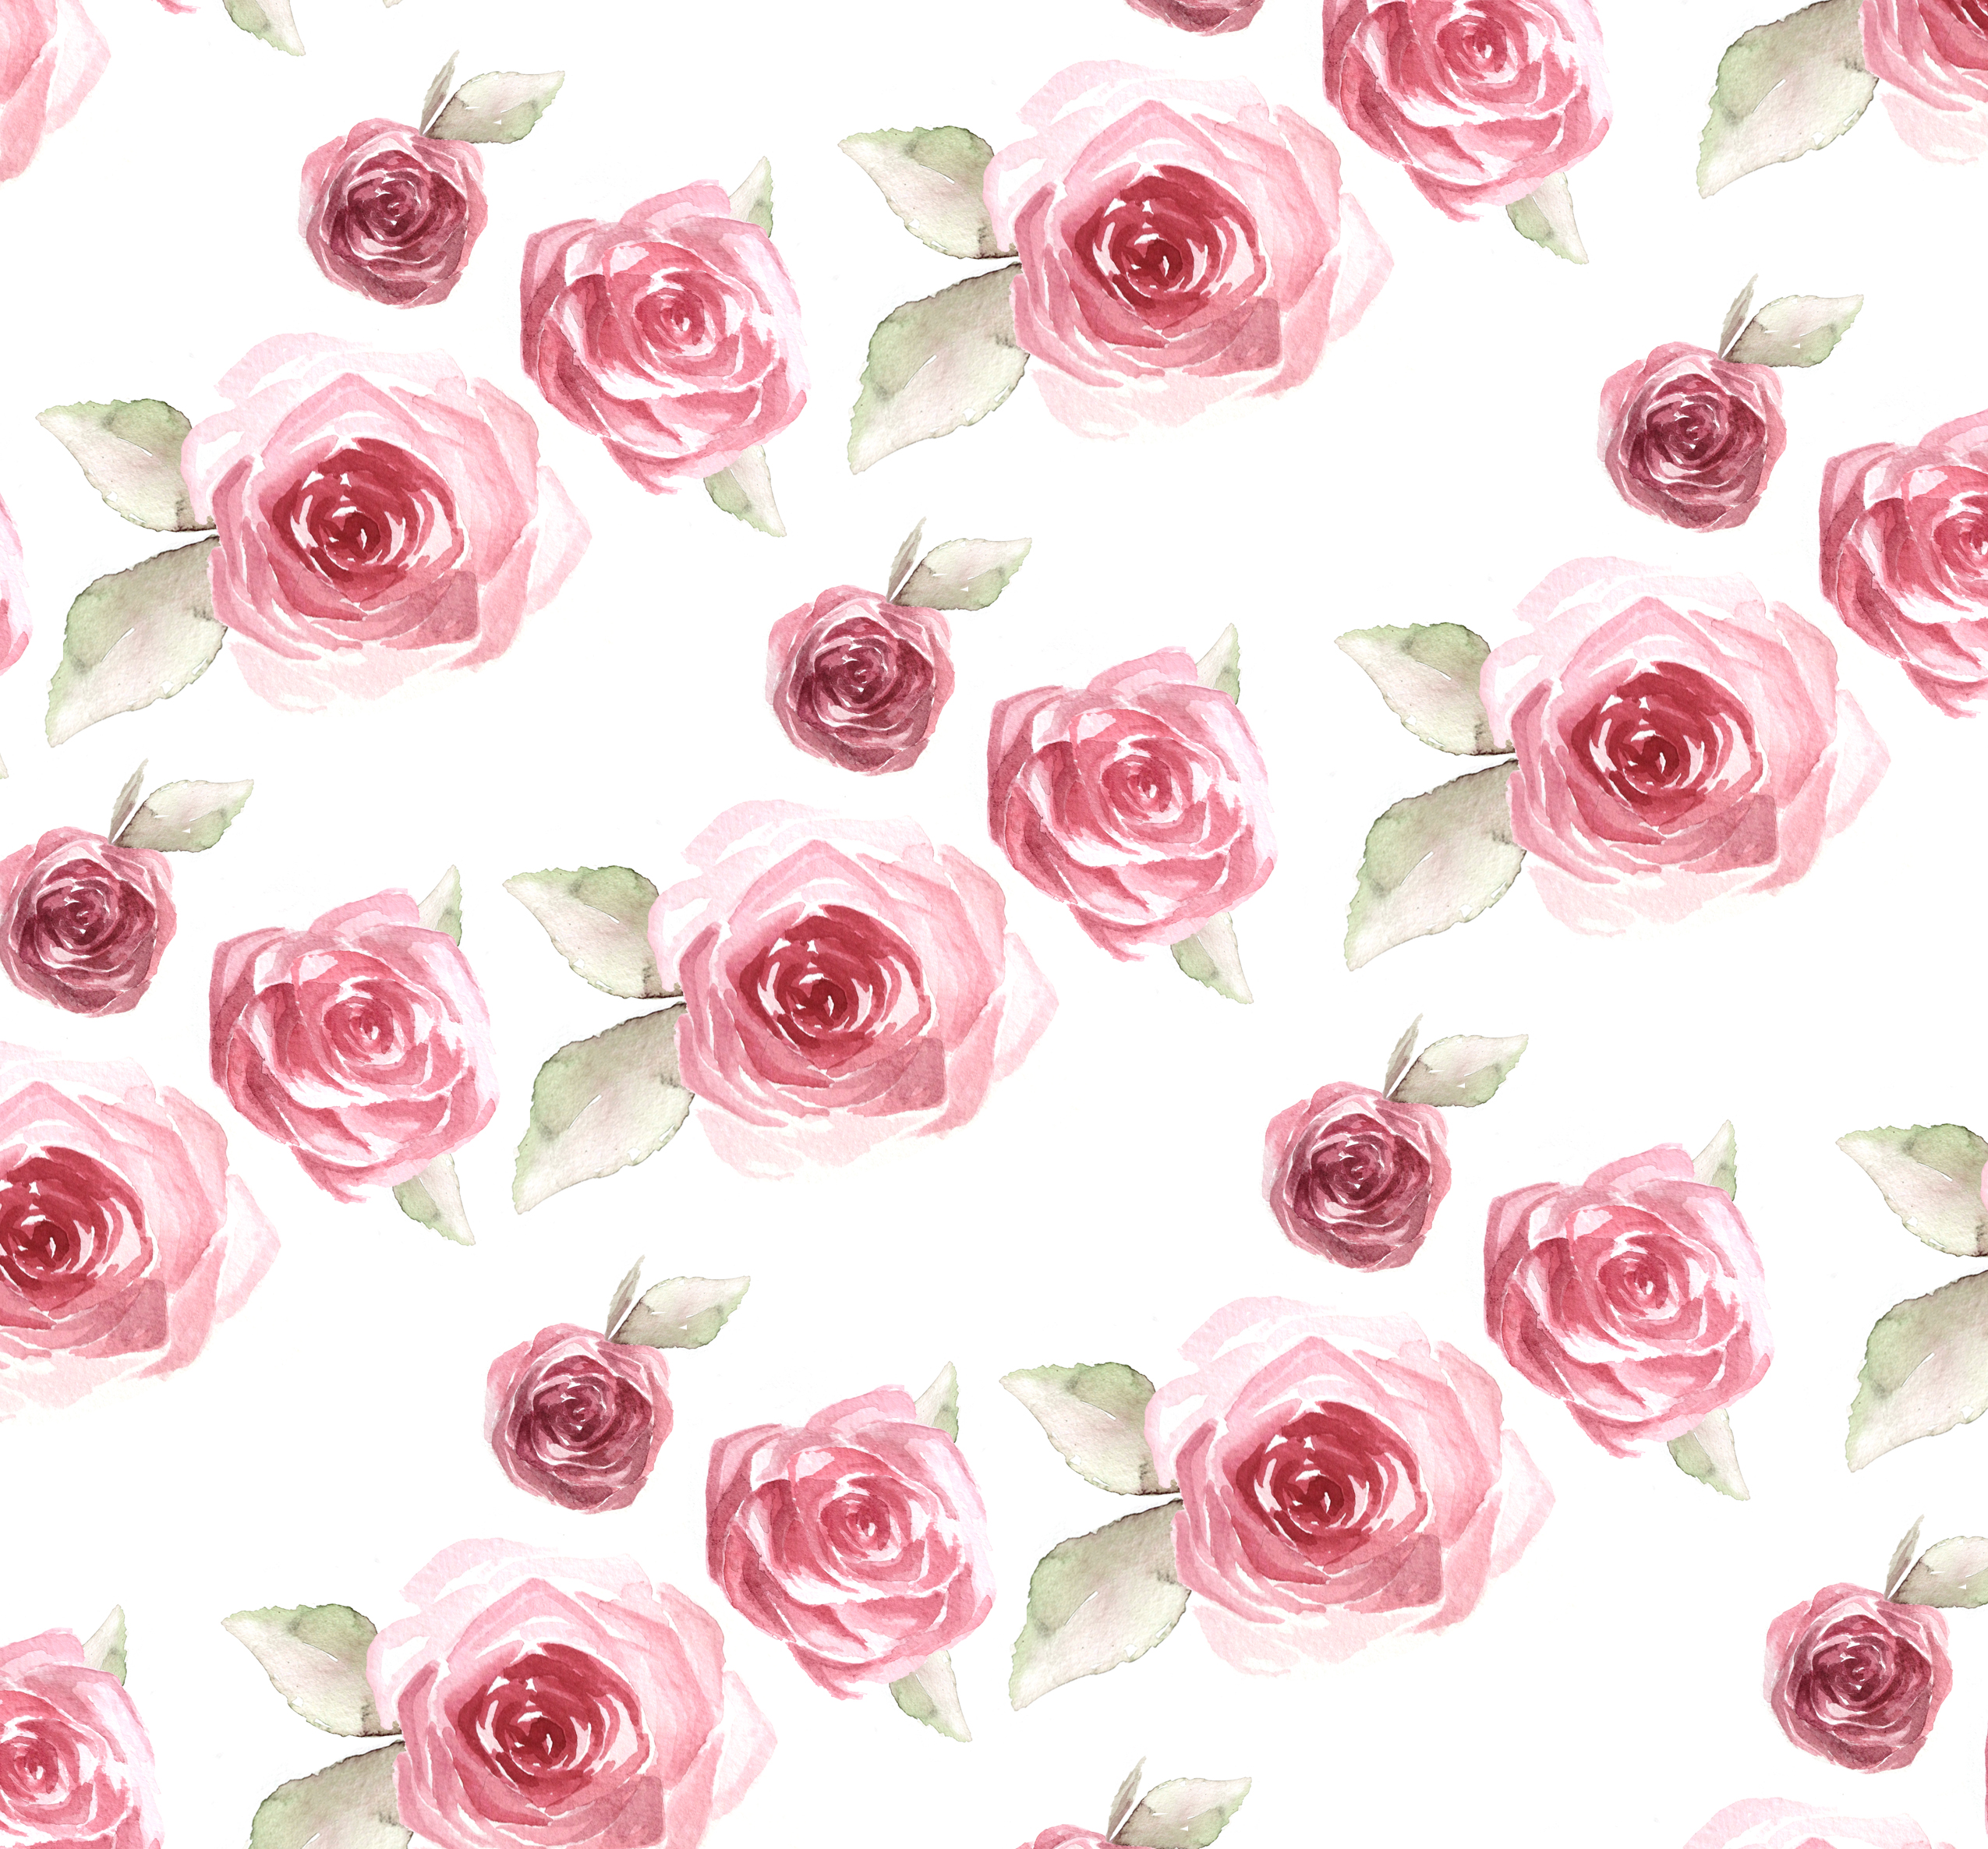 Working On This Pattern Got Me Yearning To Design Wallpaper